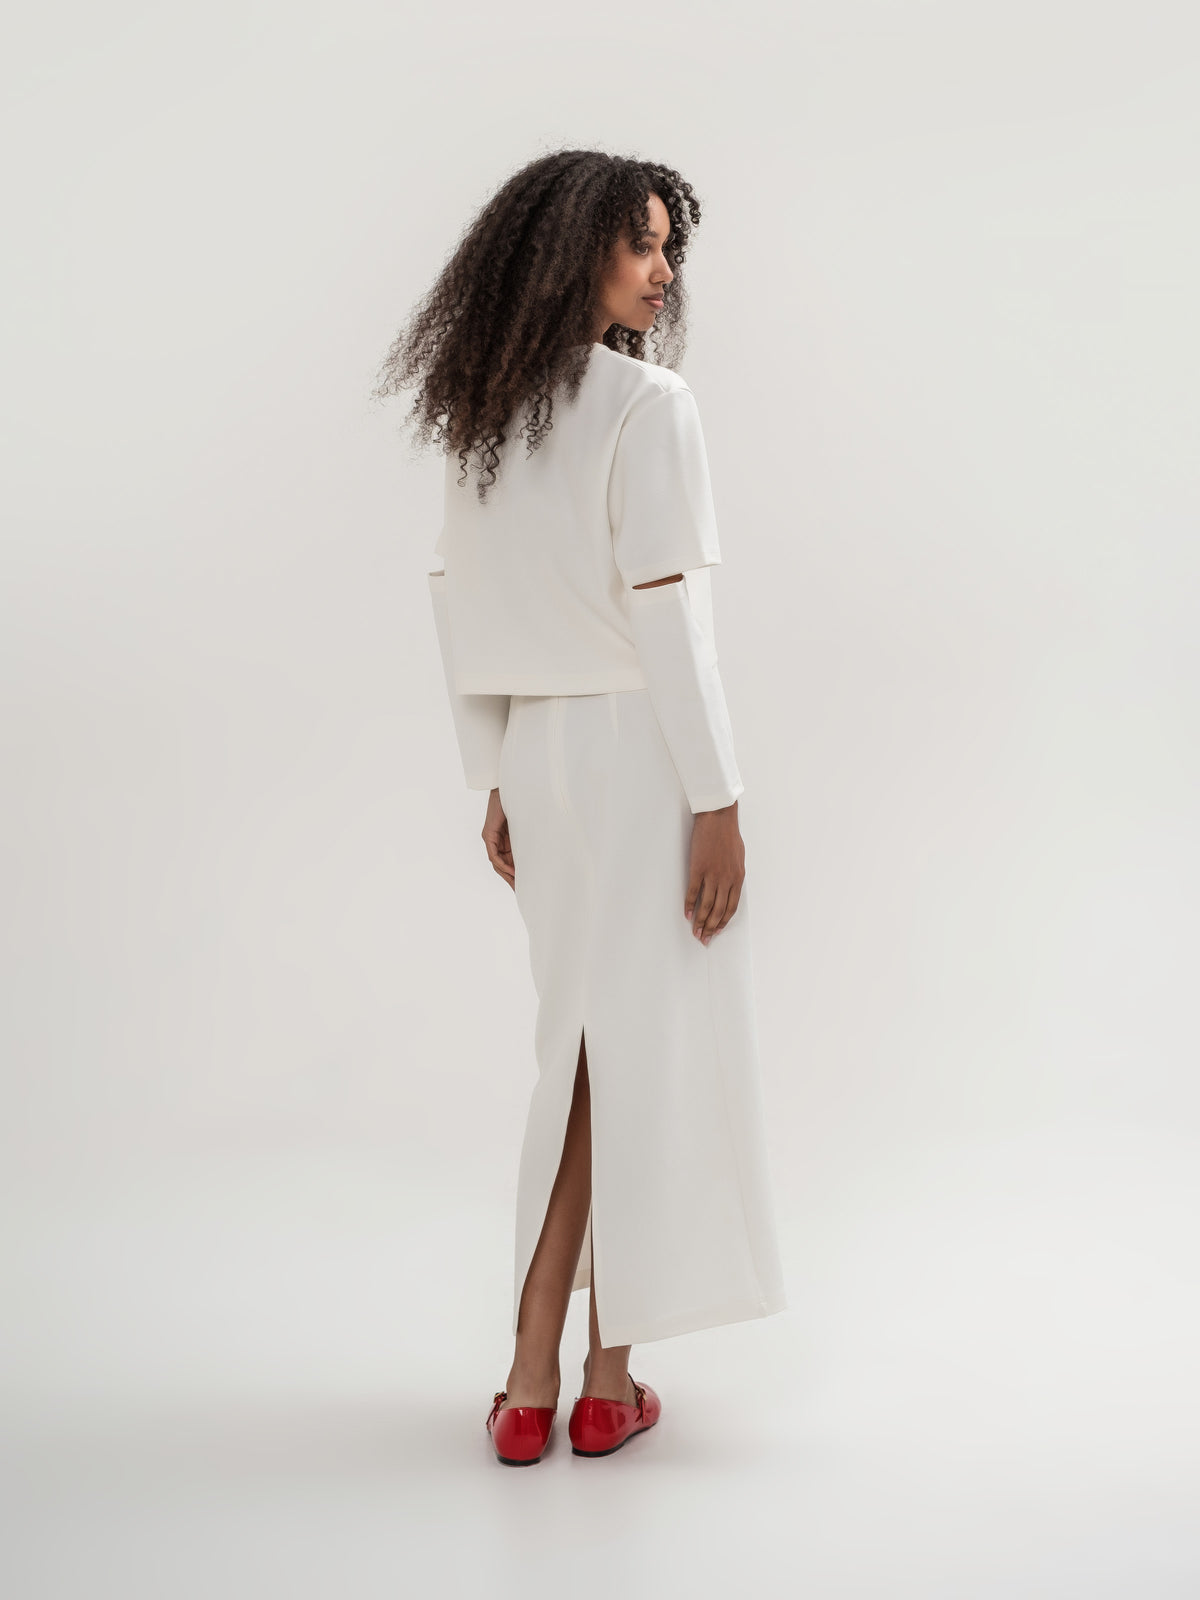 White top with slits in the elbow area and white straight long skirt with slit on the back